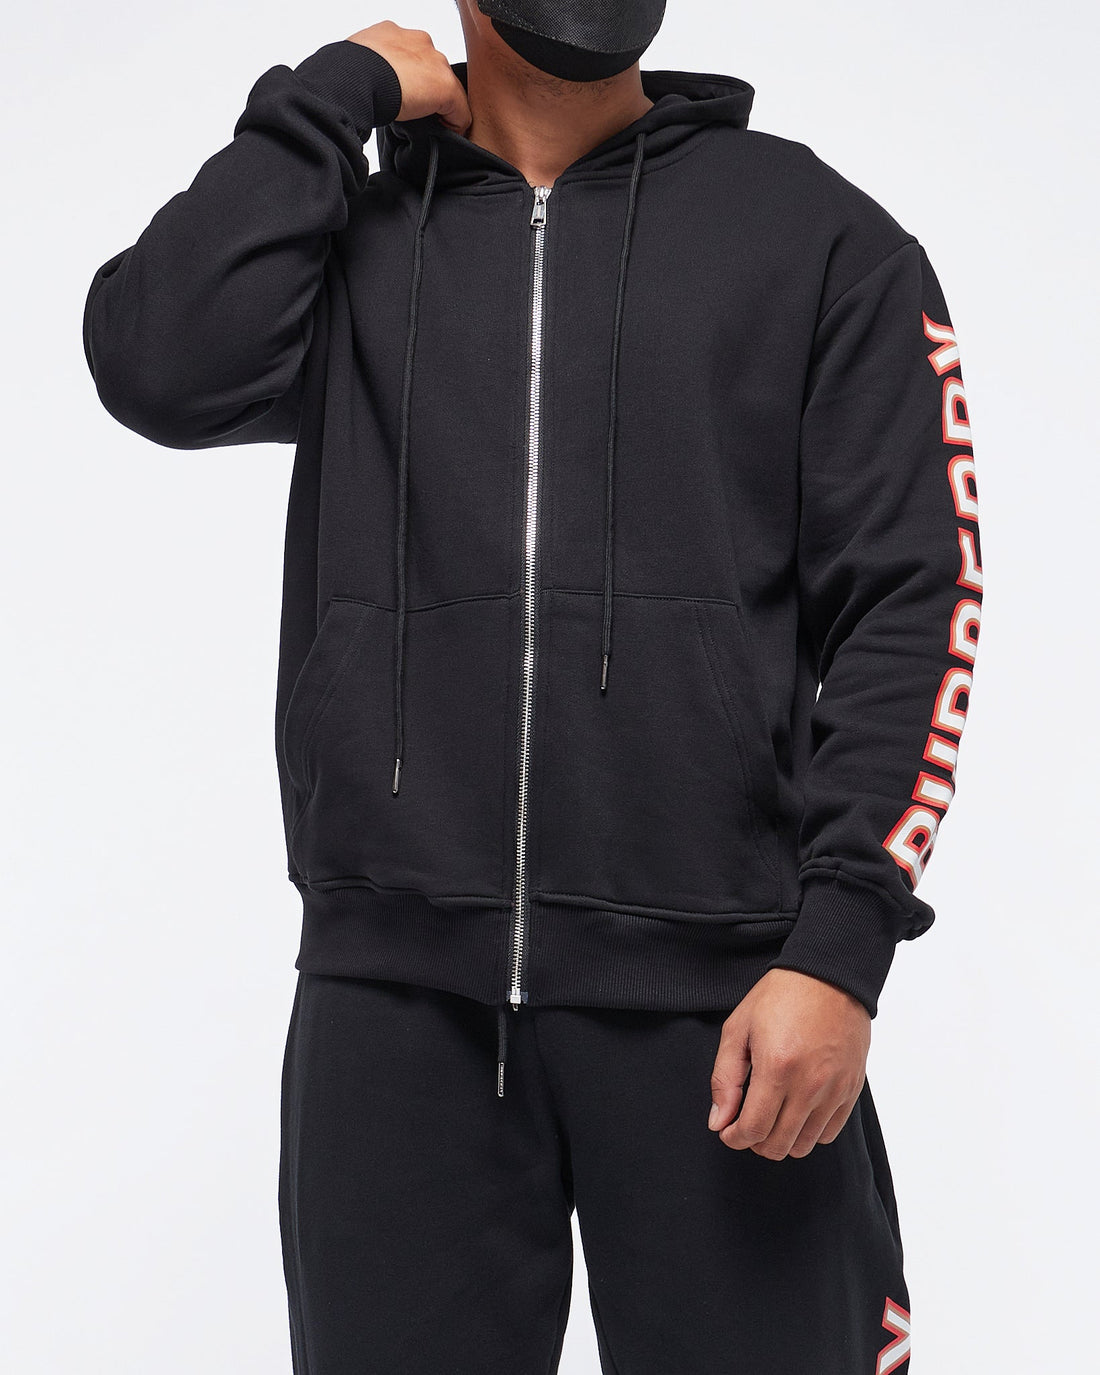 MOI OUTFIT-Vertical Sleeve Logo Printed Men Hoodie Zipped 39.90